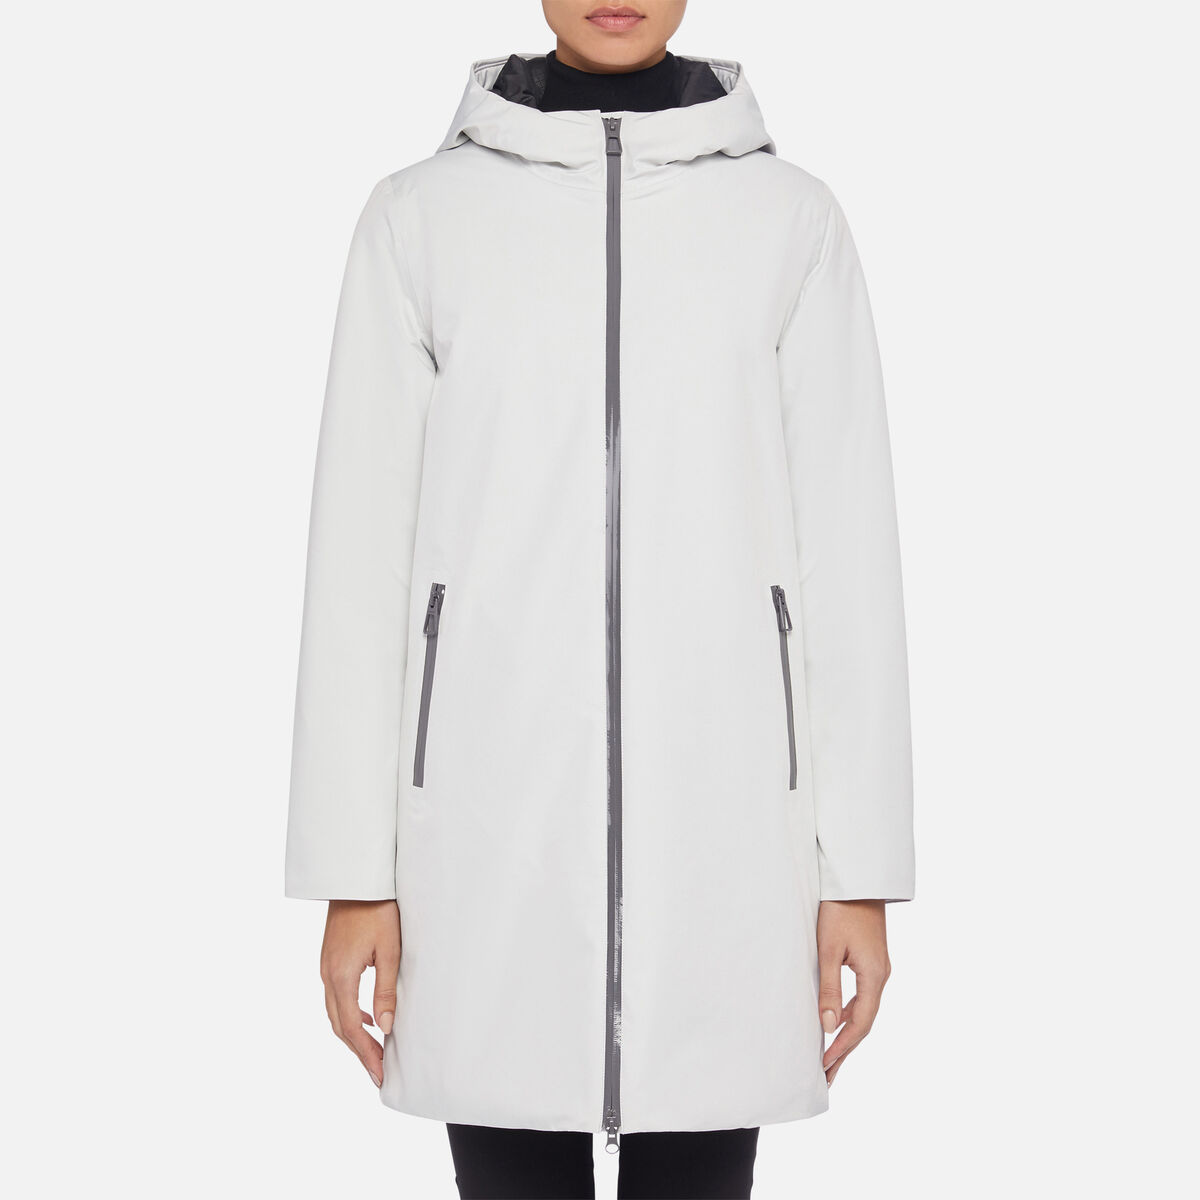 GEOX GENDRY Parka Blanche